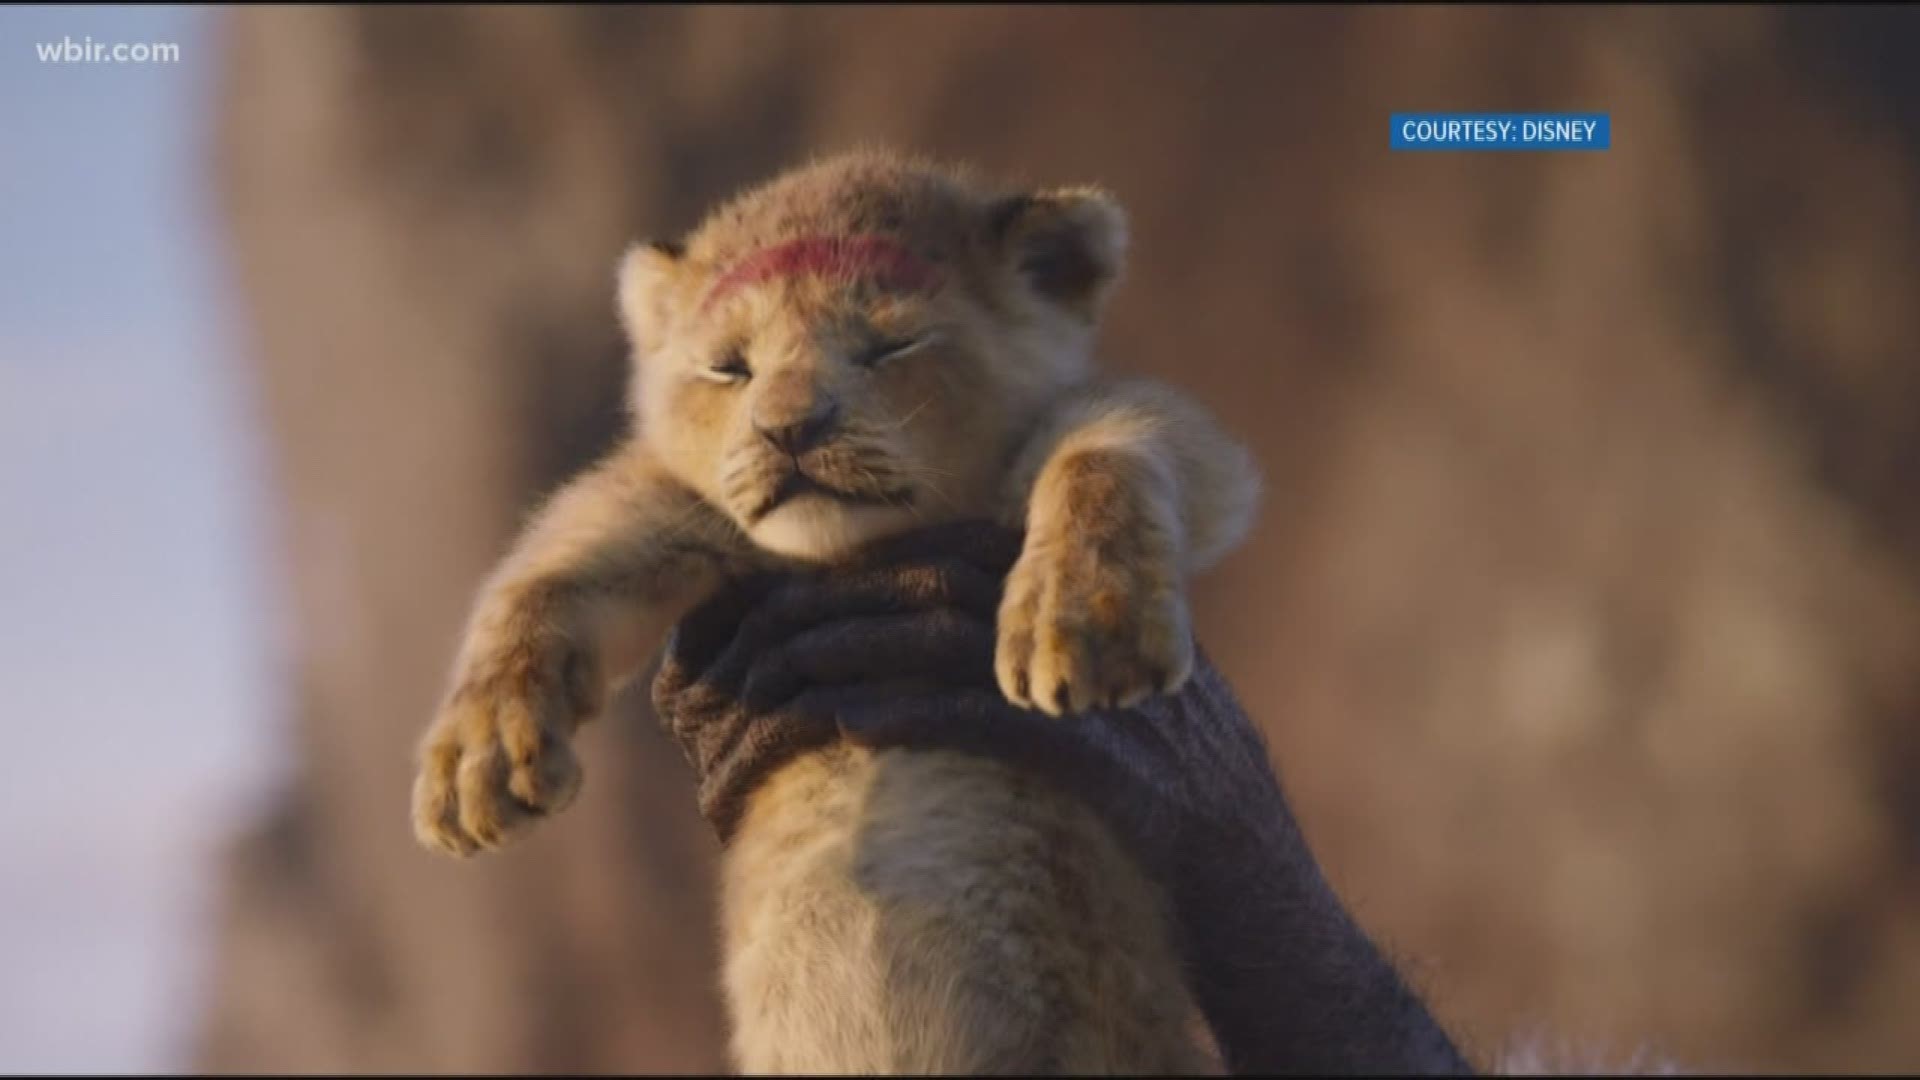 Jackie Solberg gives us the scoop on the new movie "The Lion King" from a parent's perspective.